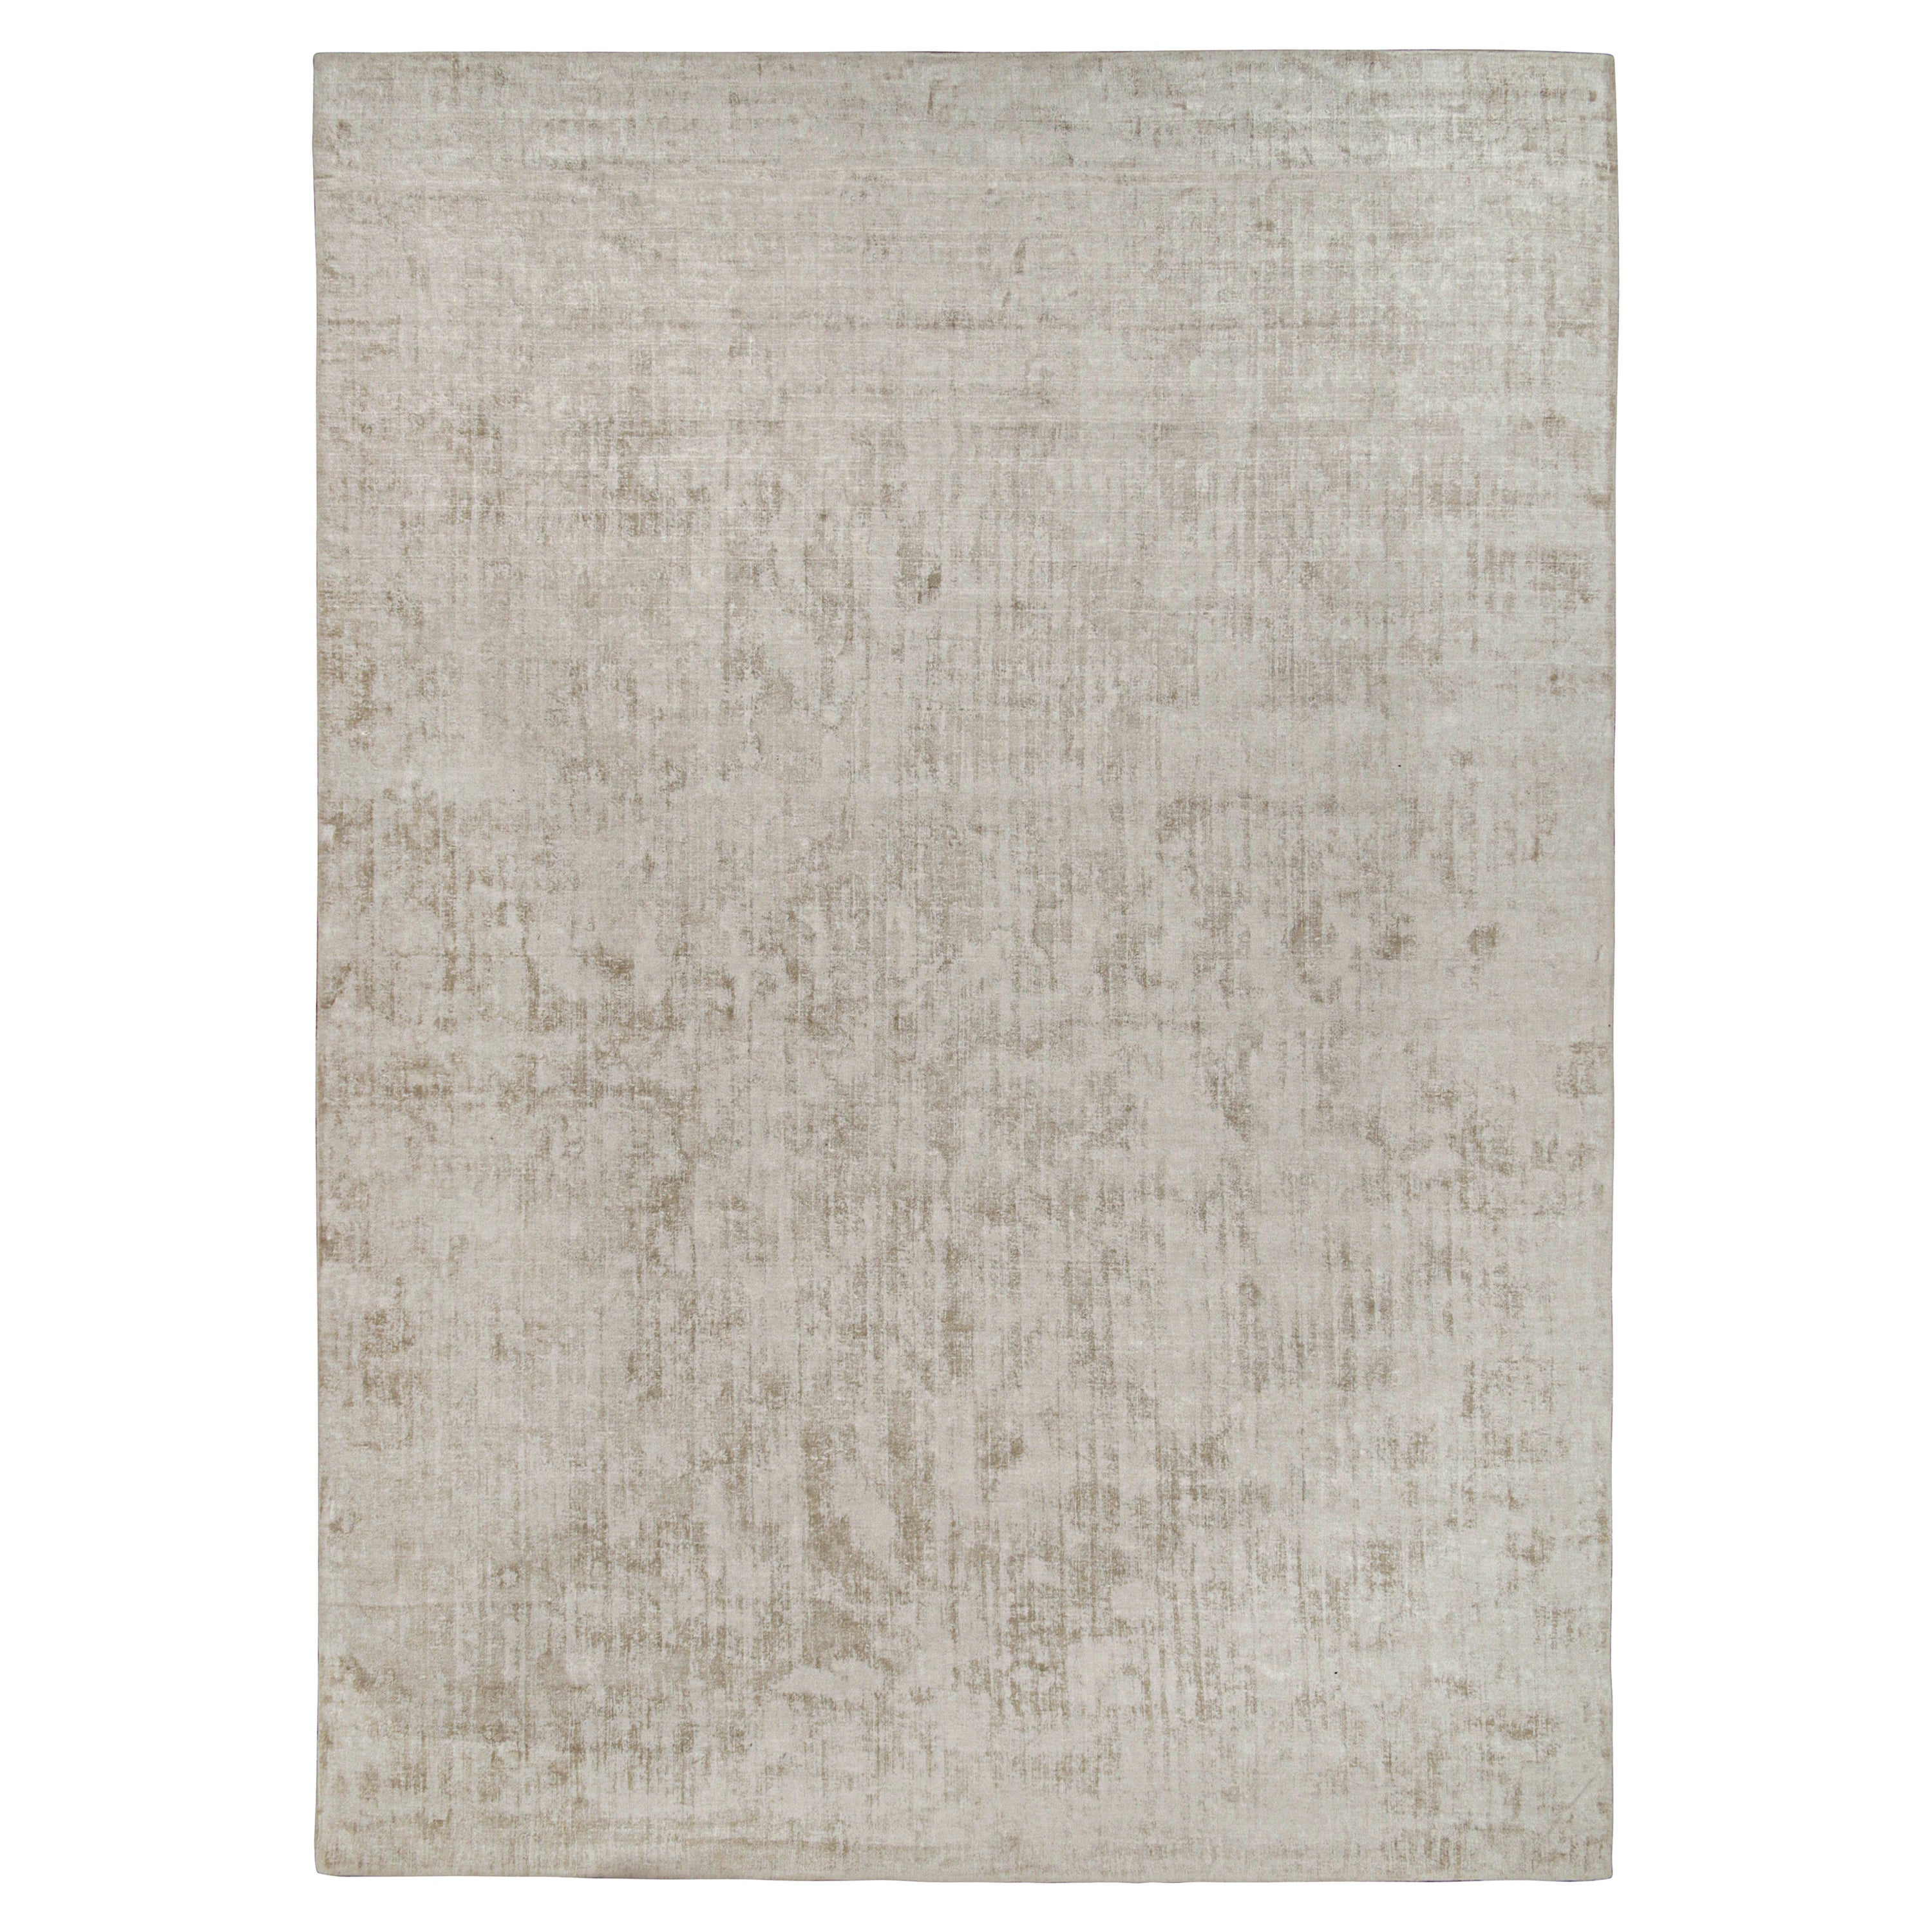 This contemporary 14x20 palace-sized rug is a grand new entry to Rug & Kilim’s Modern Collection. Hand-knotted in art silk and cotton. 

Connoisseurs will note this piece is from our new Light on Loom line, which includes quicker custom capabilities